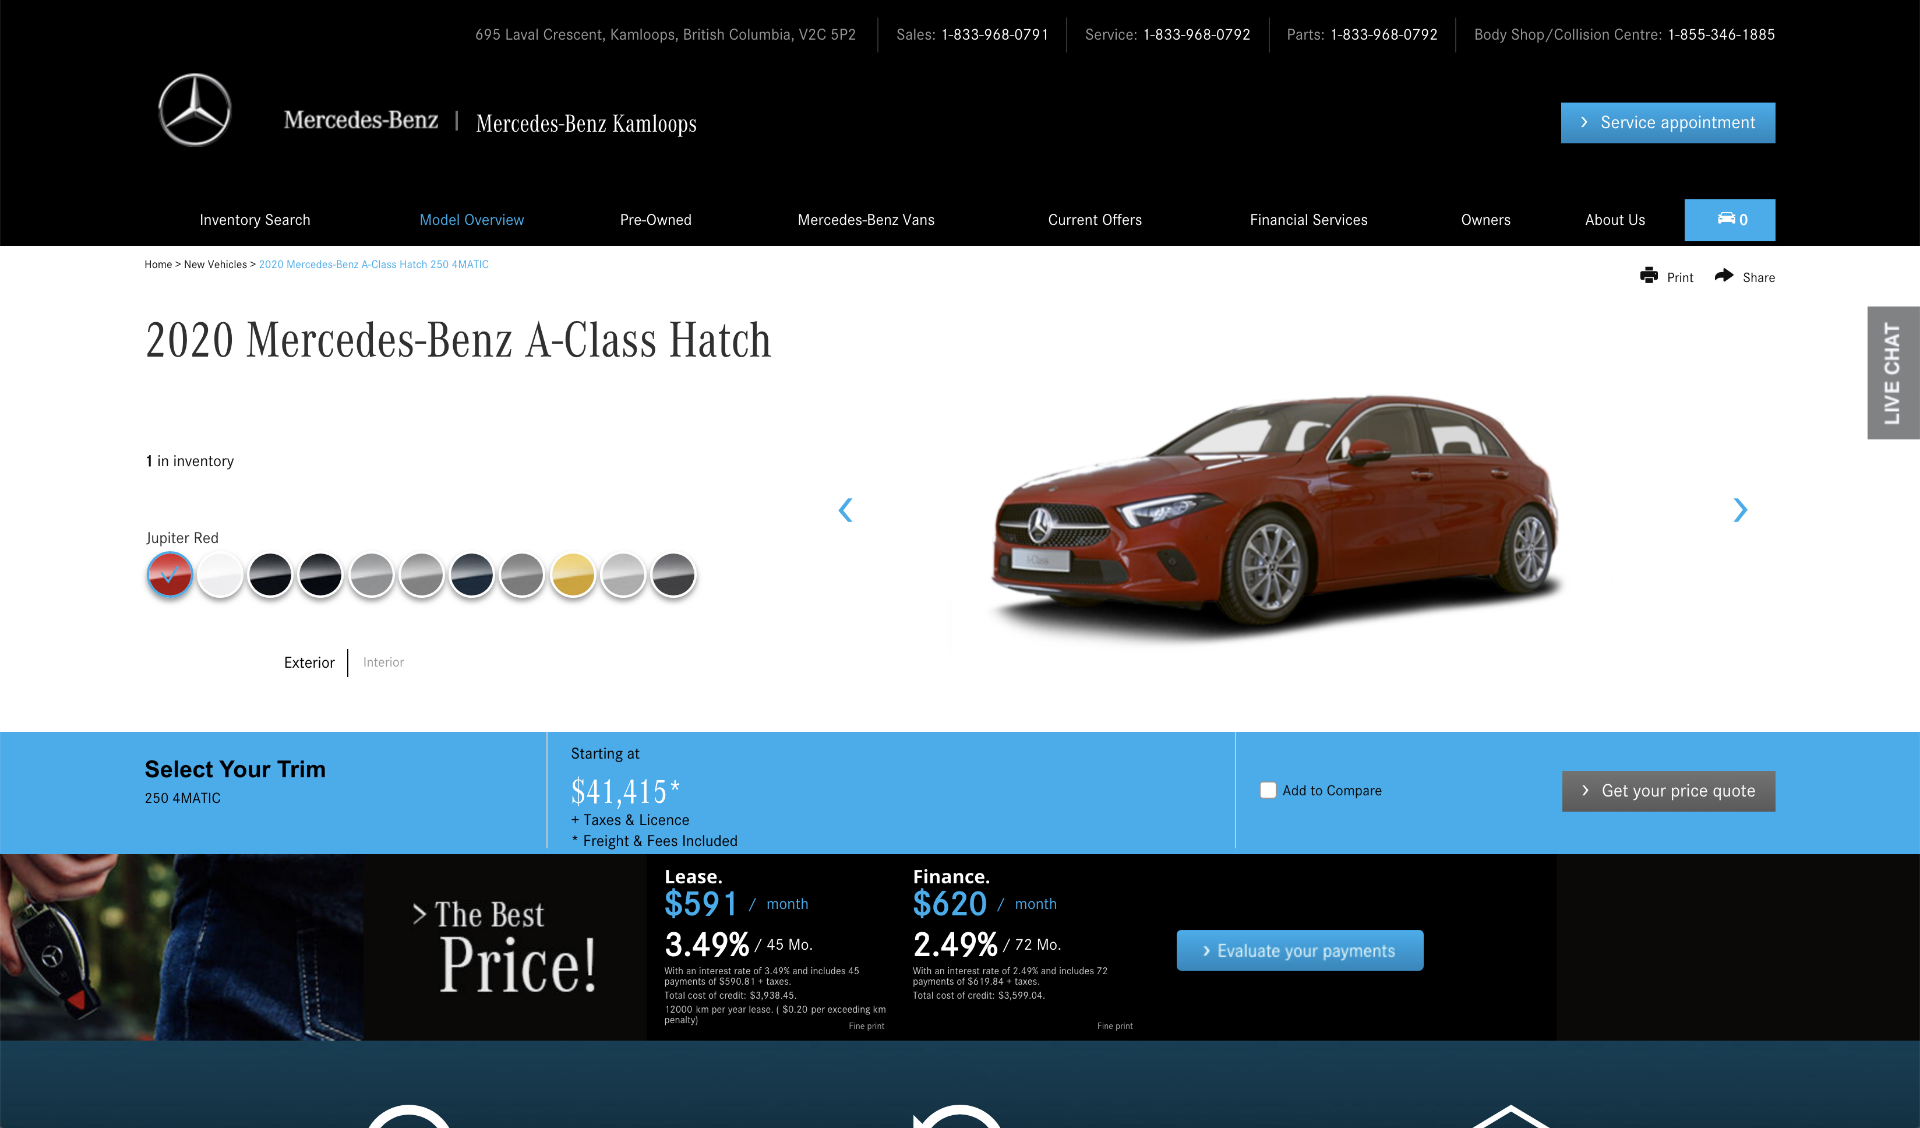 How to Shop a New Mercedes-Benz Vehicle on Mercedes-Benz Kamloops’ Website